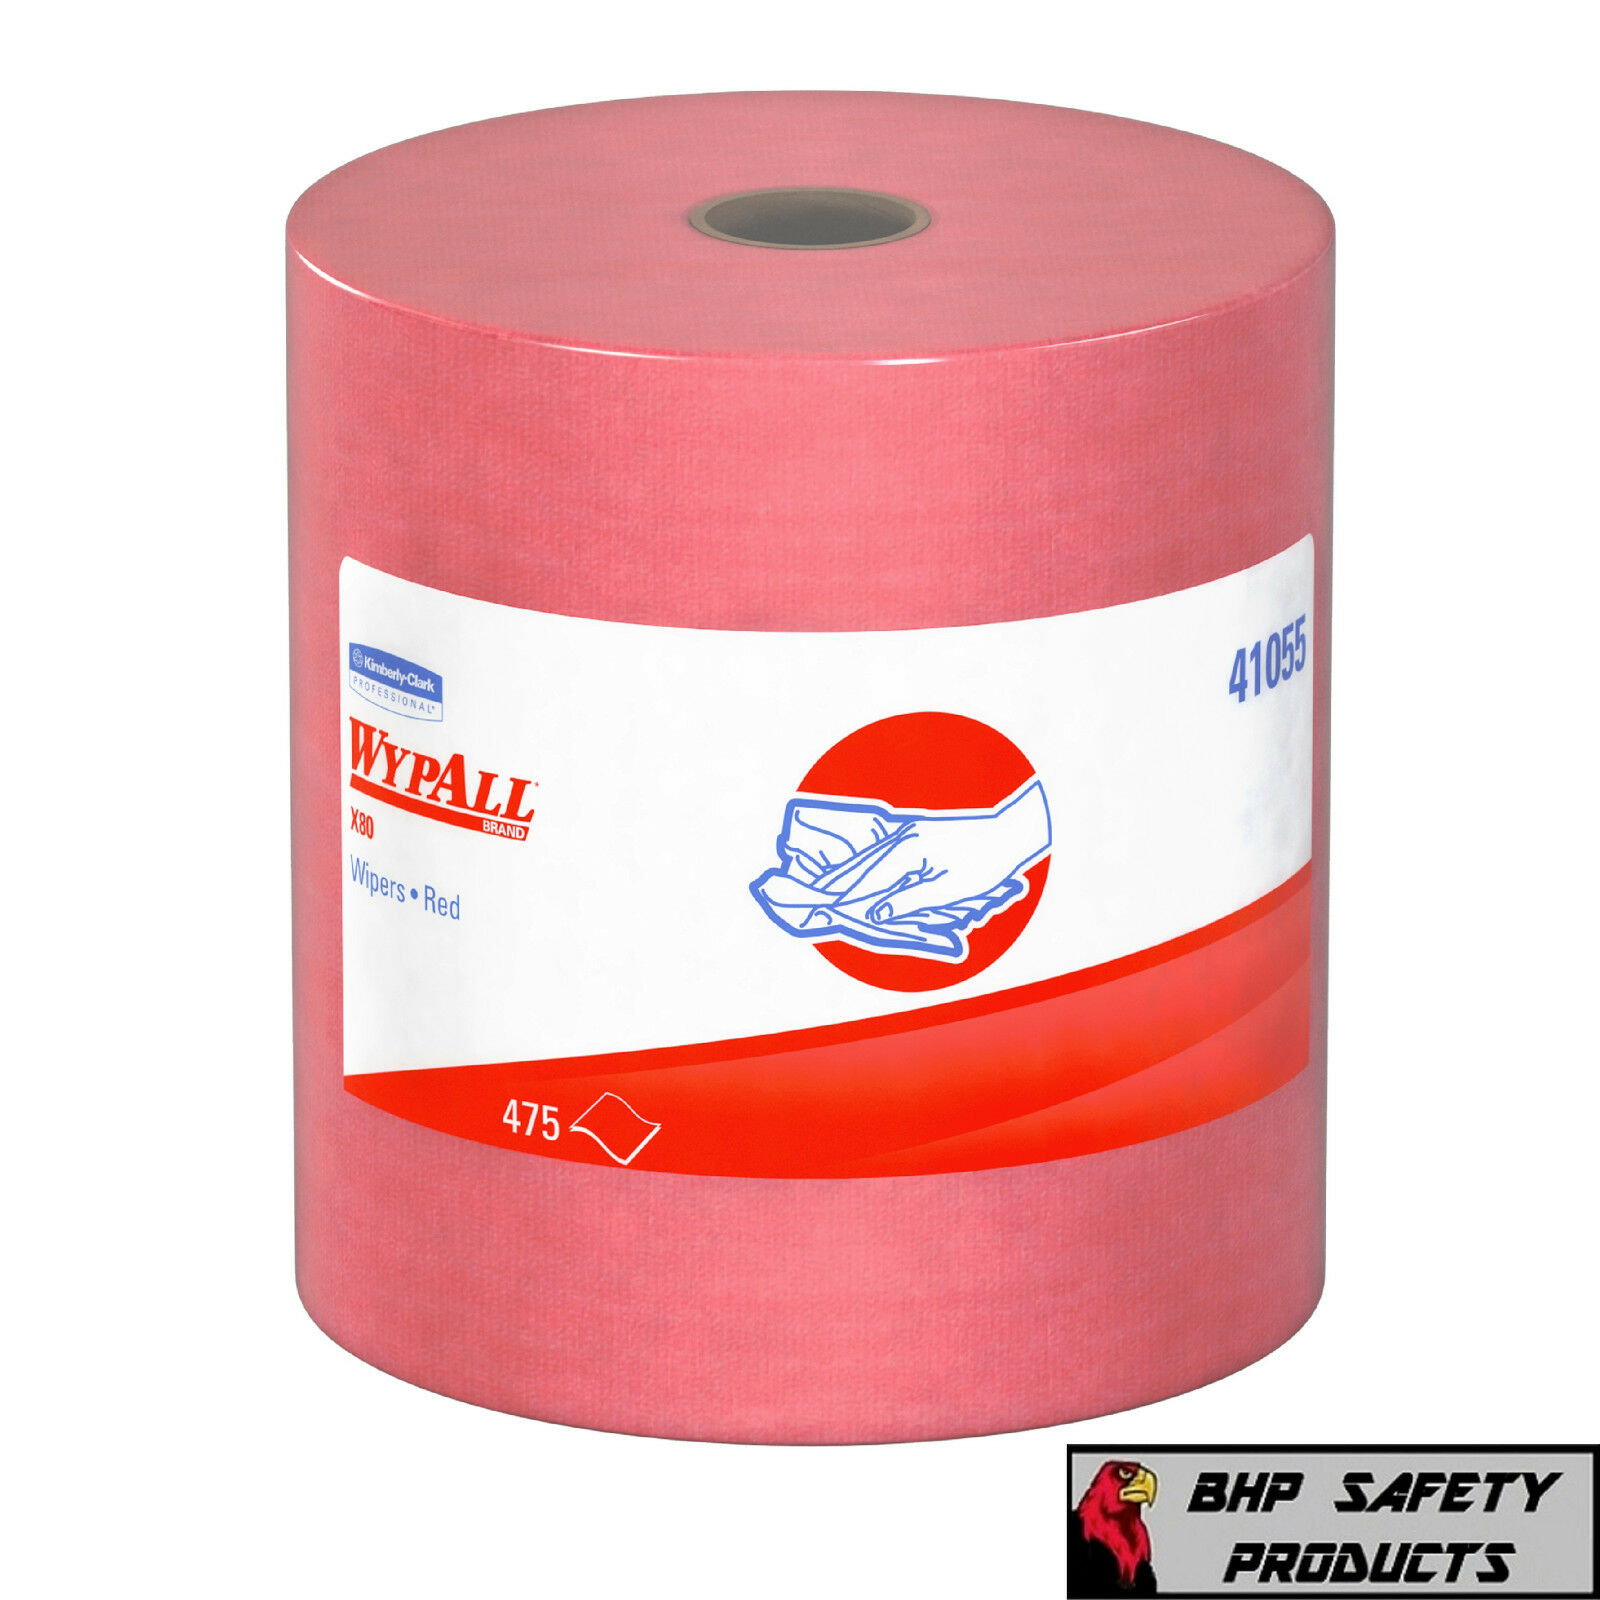 Kimberly Clark Wypall X80 Wipers Shop Towels Cleaning Rags 41055 Red Jumbo Roll